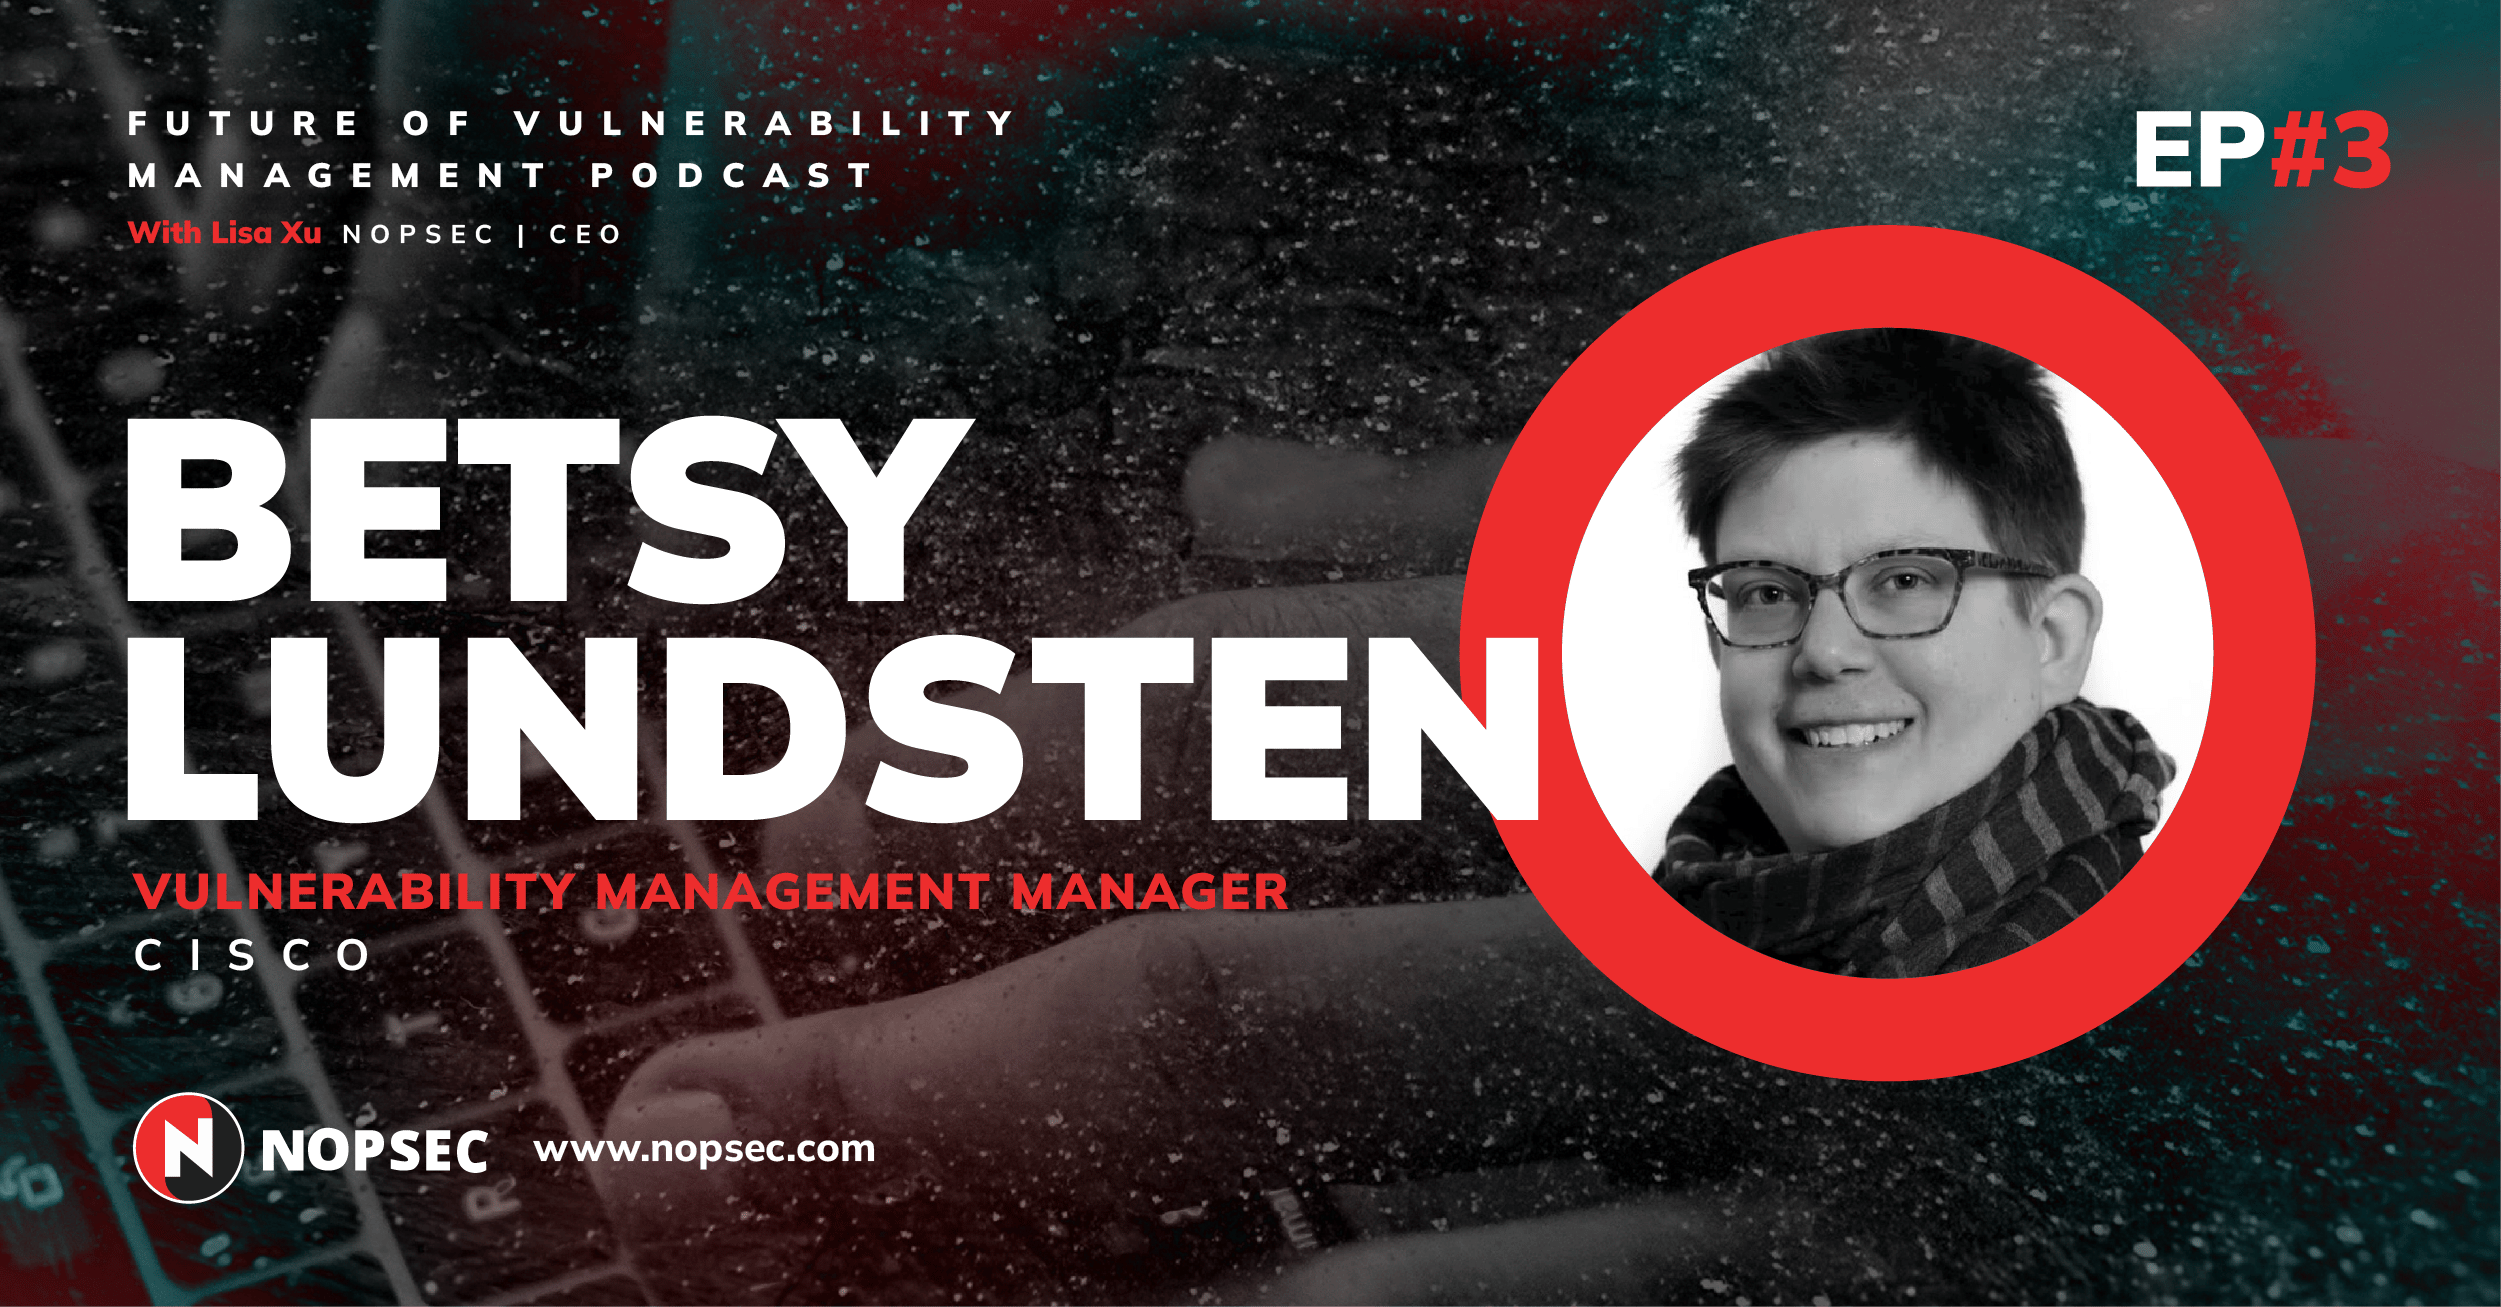 Future of Vulnerability Management Podcast Episode 3 Featuring Betsy Lundsten